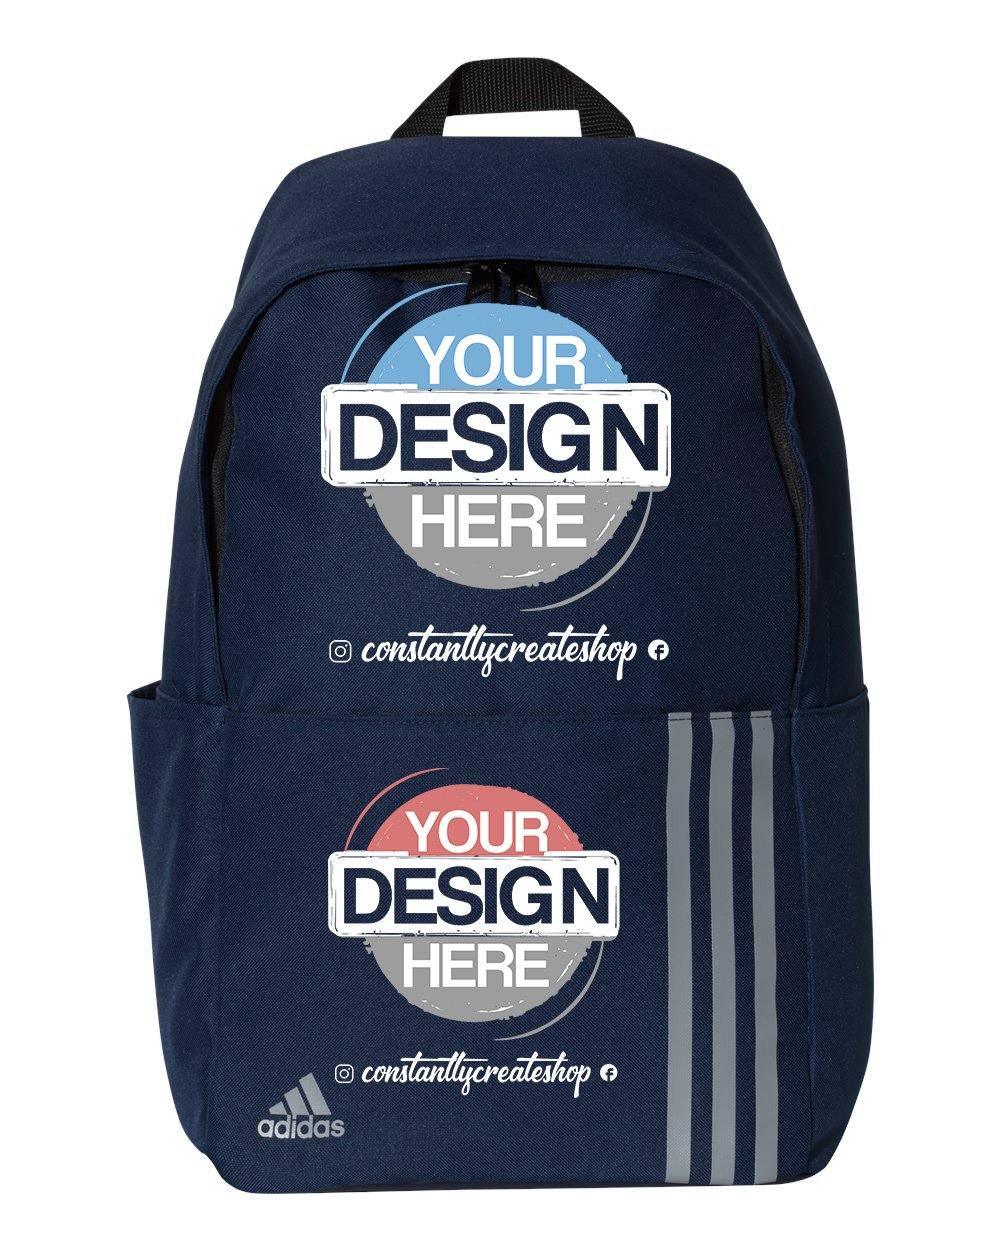 Adidas 3-Stripes Backpack - Constantly Create Shop